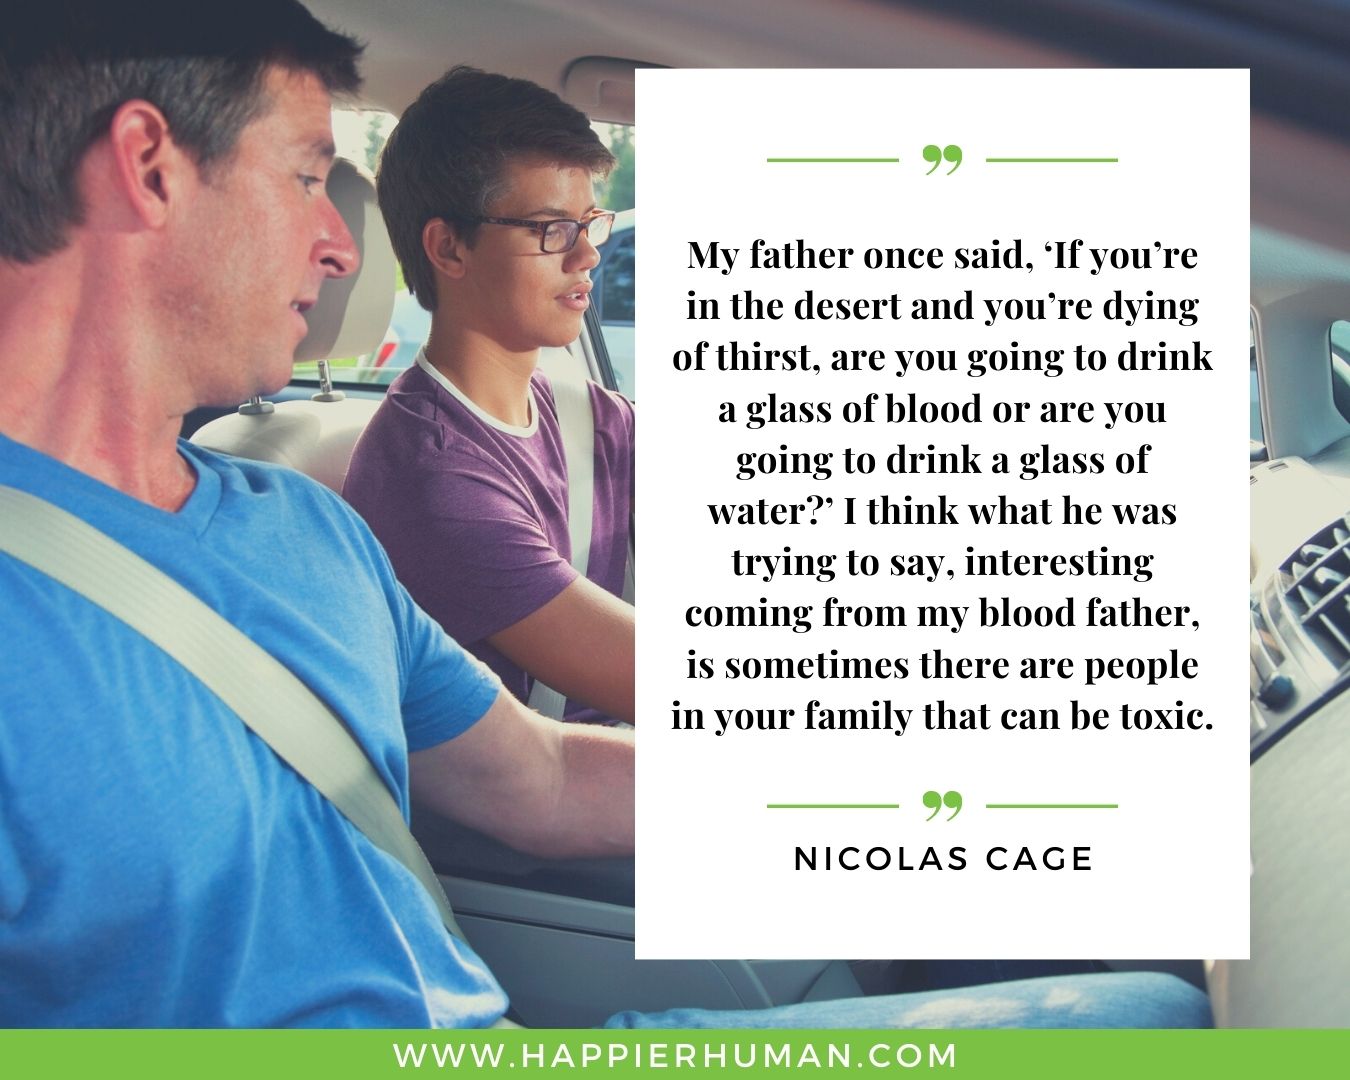 Toxic People Quotes - “My father once said, ‘If you’re in the desert and you’re dying of thirst, are you going to drink a glass of blood or are you going to drink a glass of water?’ I think what he was trying to say, interesting coming from my blood father, is sometimes there are people in your family that can be toxic.” – Nicolas Cage